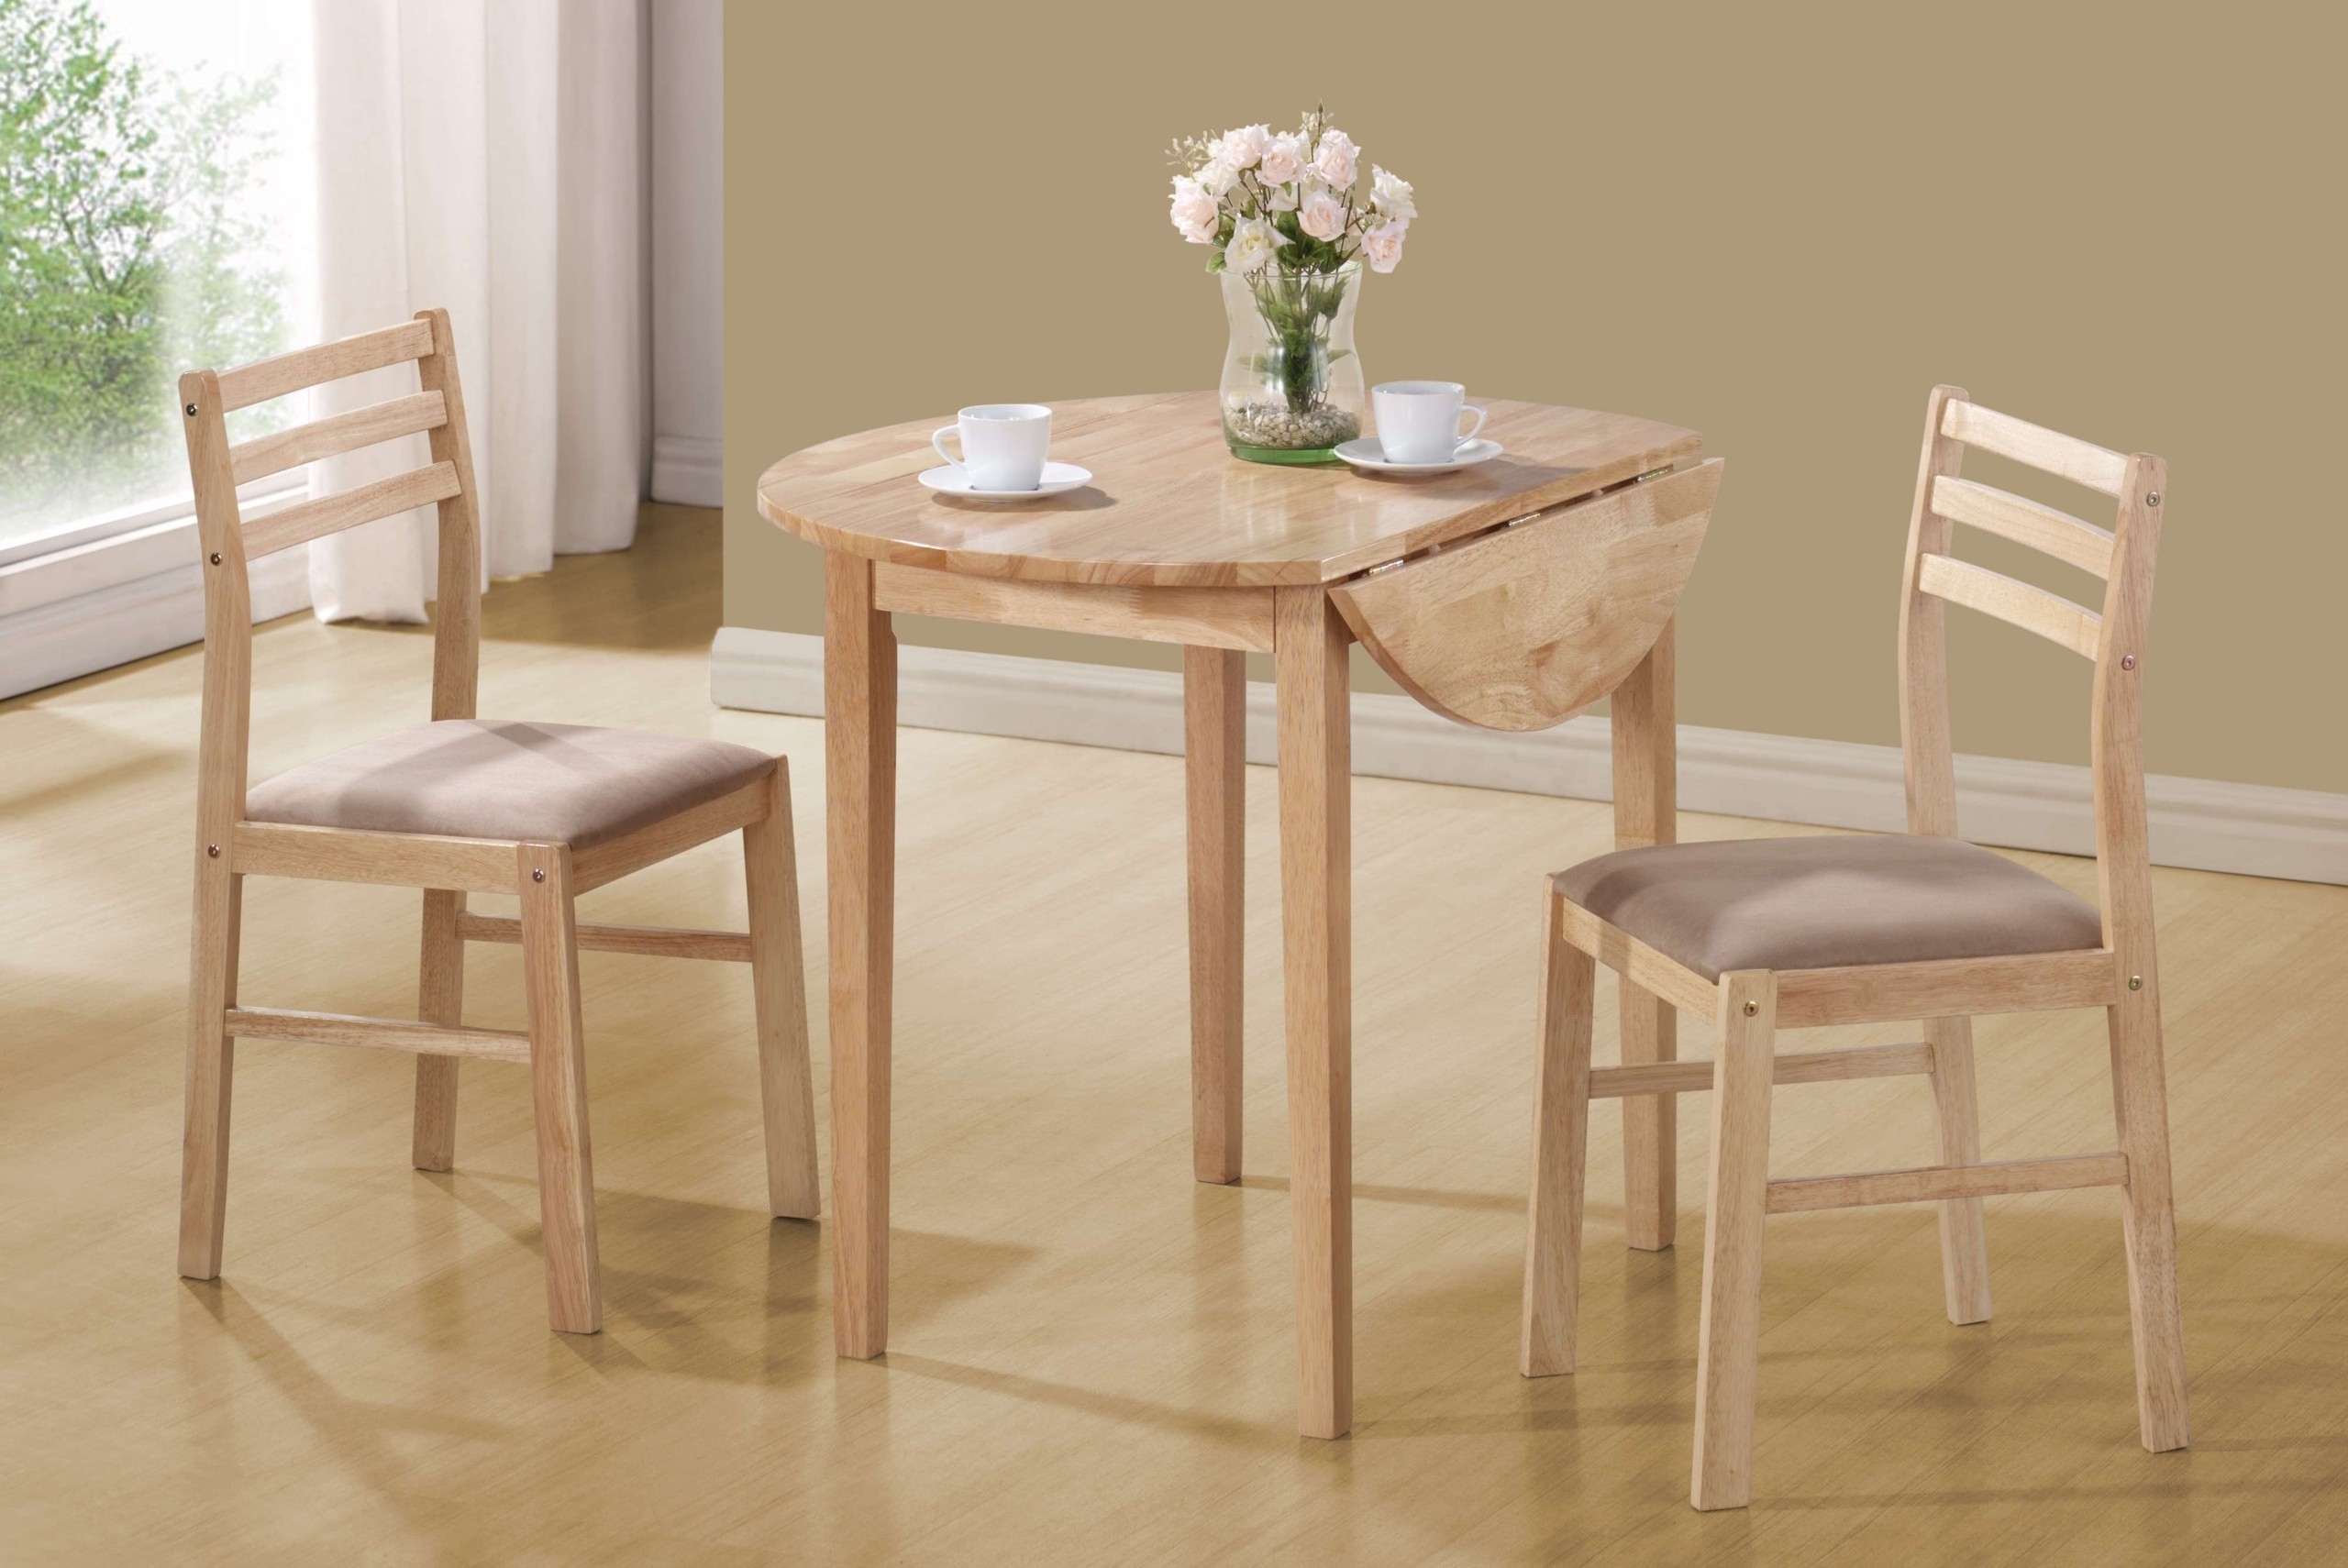 Dinette Sets For Small Spaces 